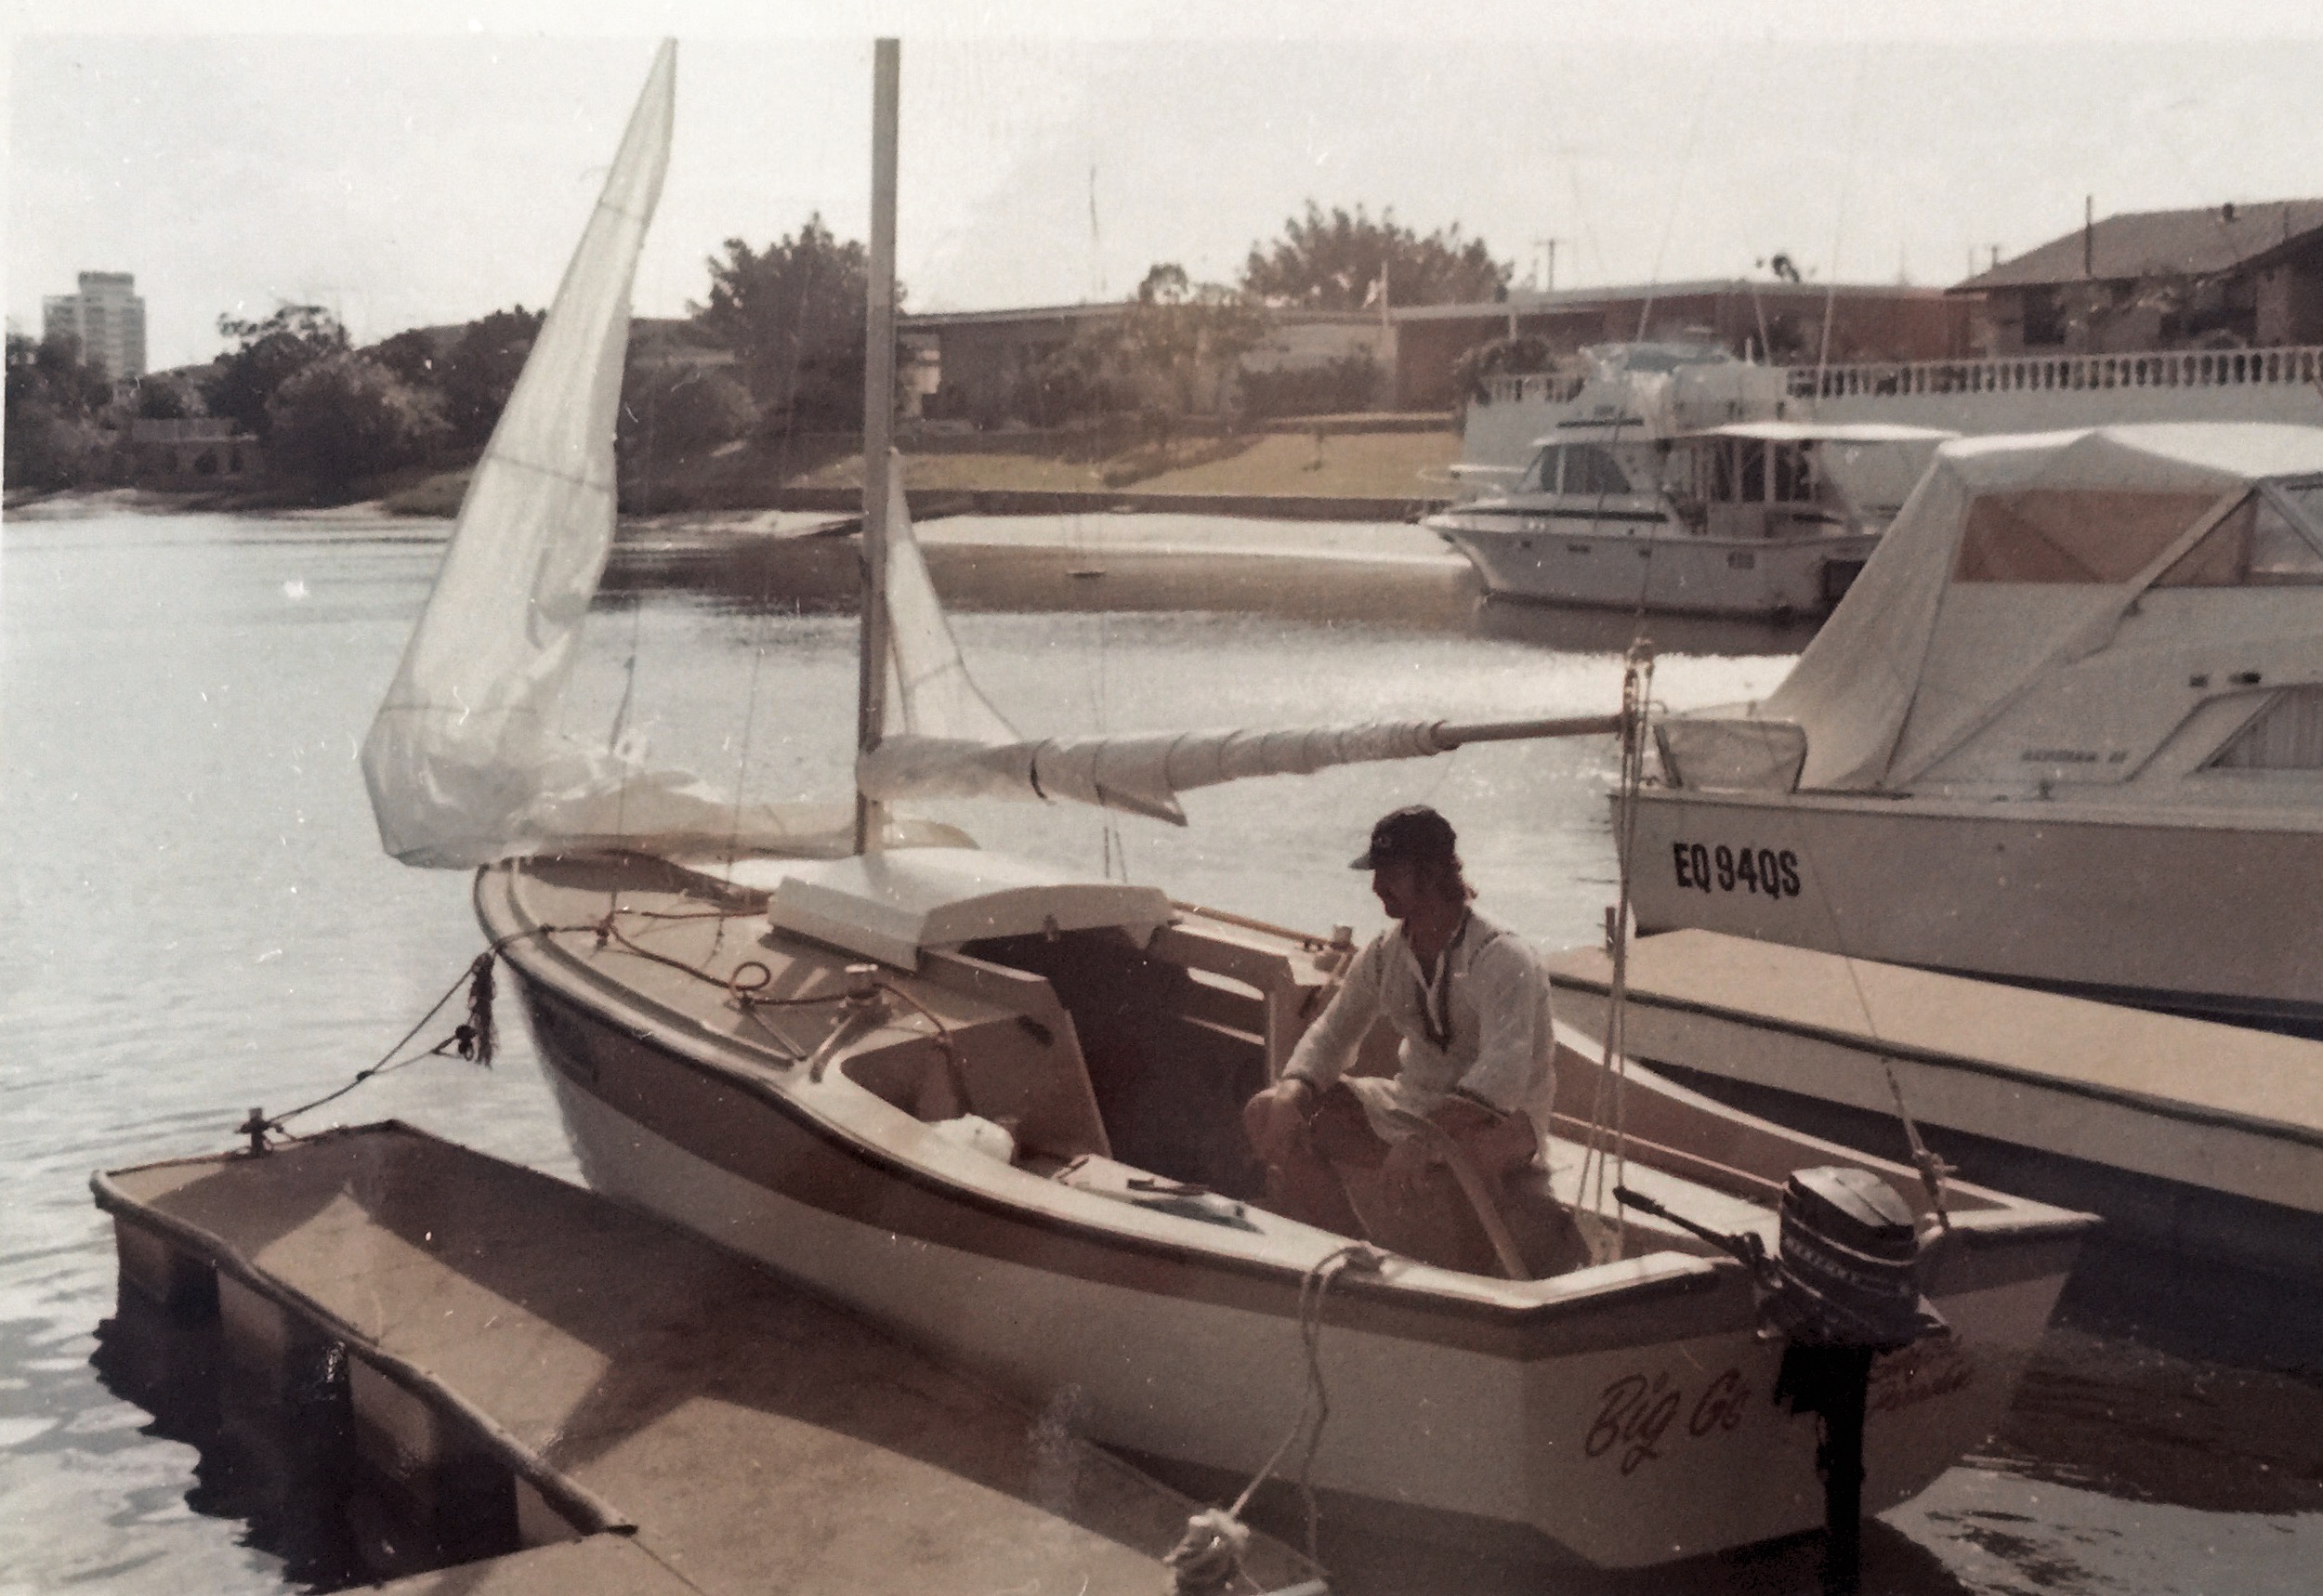 Graham in his yacht at Isle of Capri Gold Coast 1973 in “Big G’s”